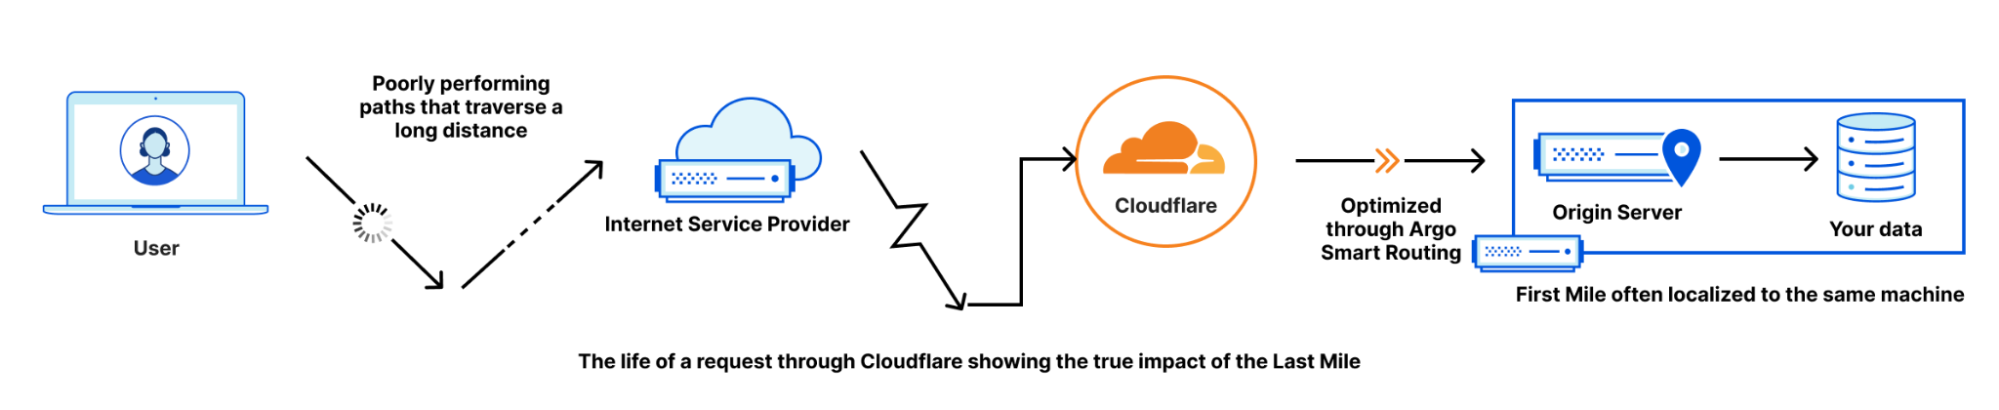 life of a request through Cloudflare showing the true impact of the Last Mile